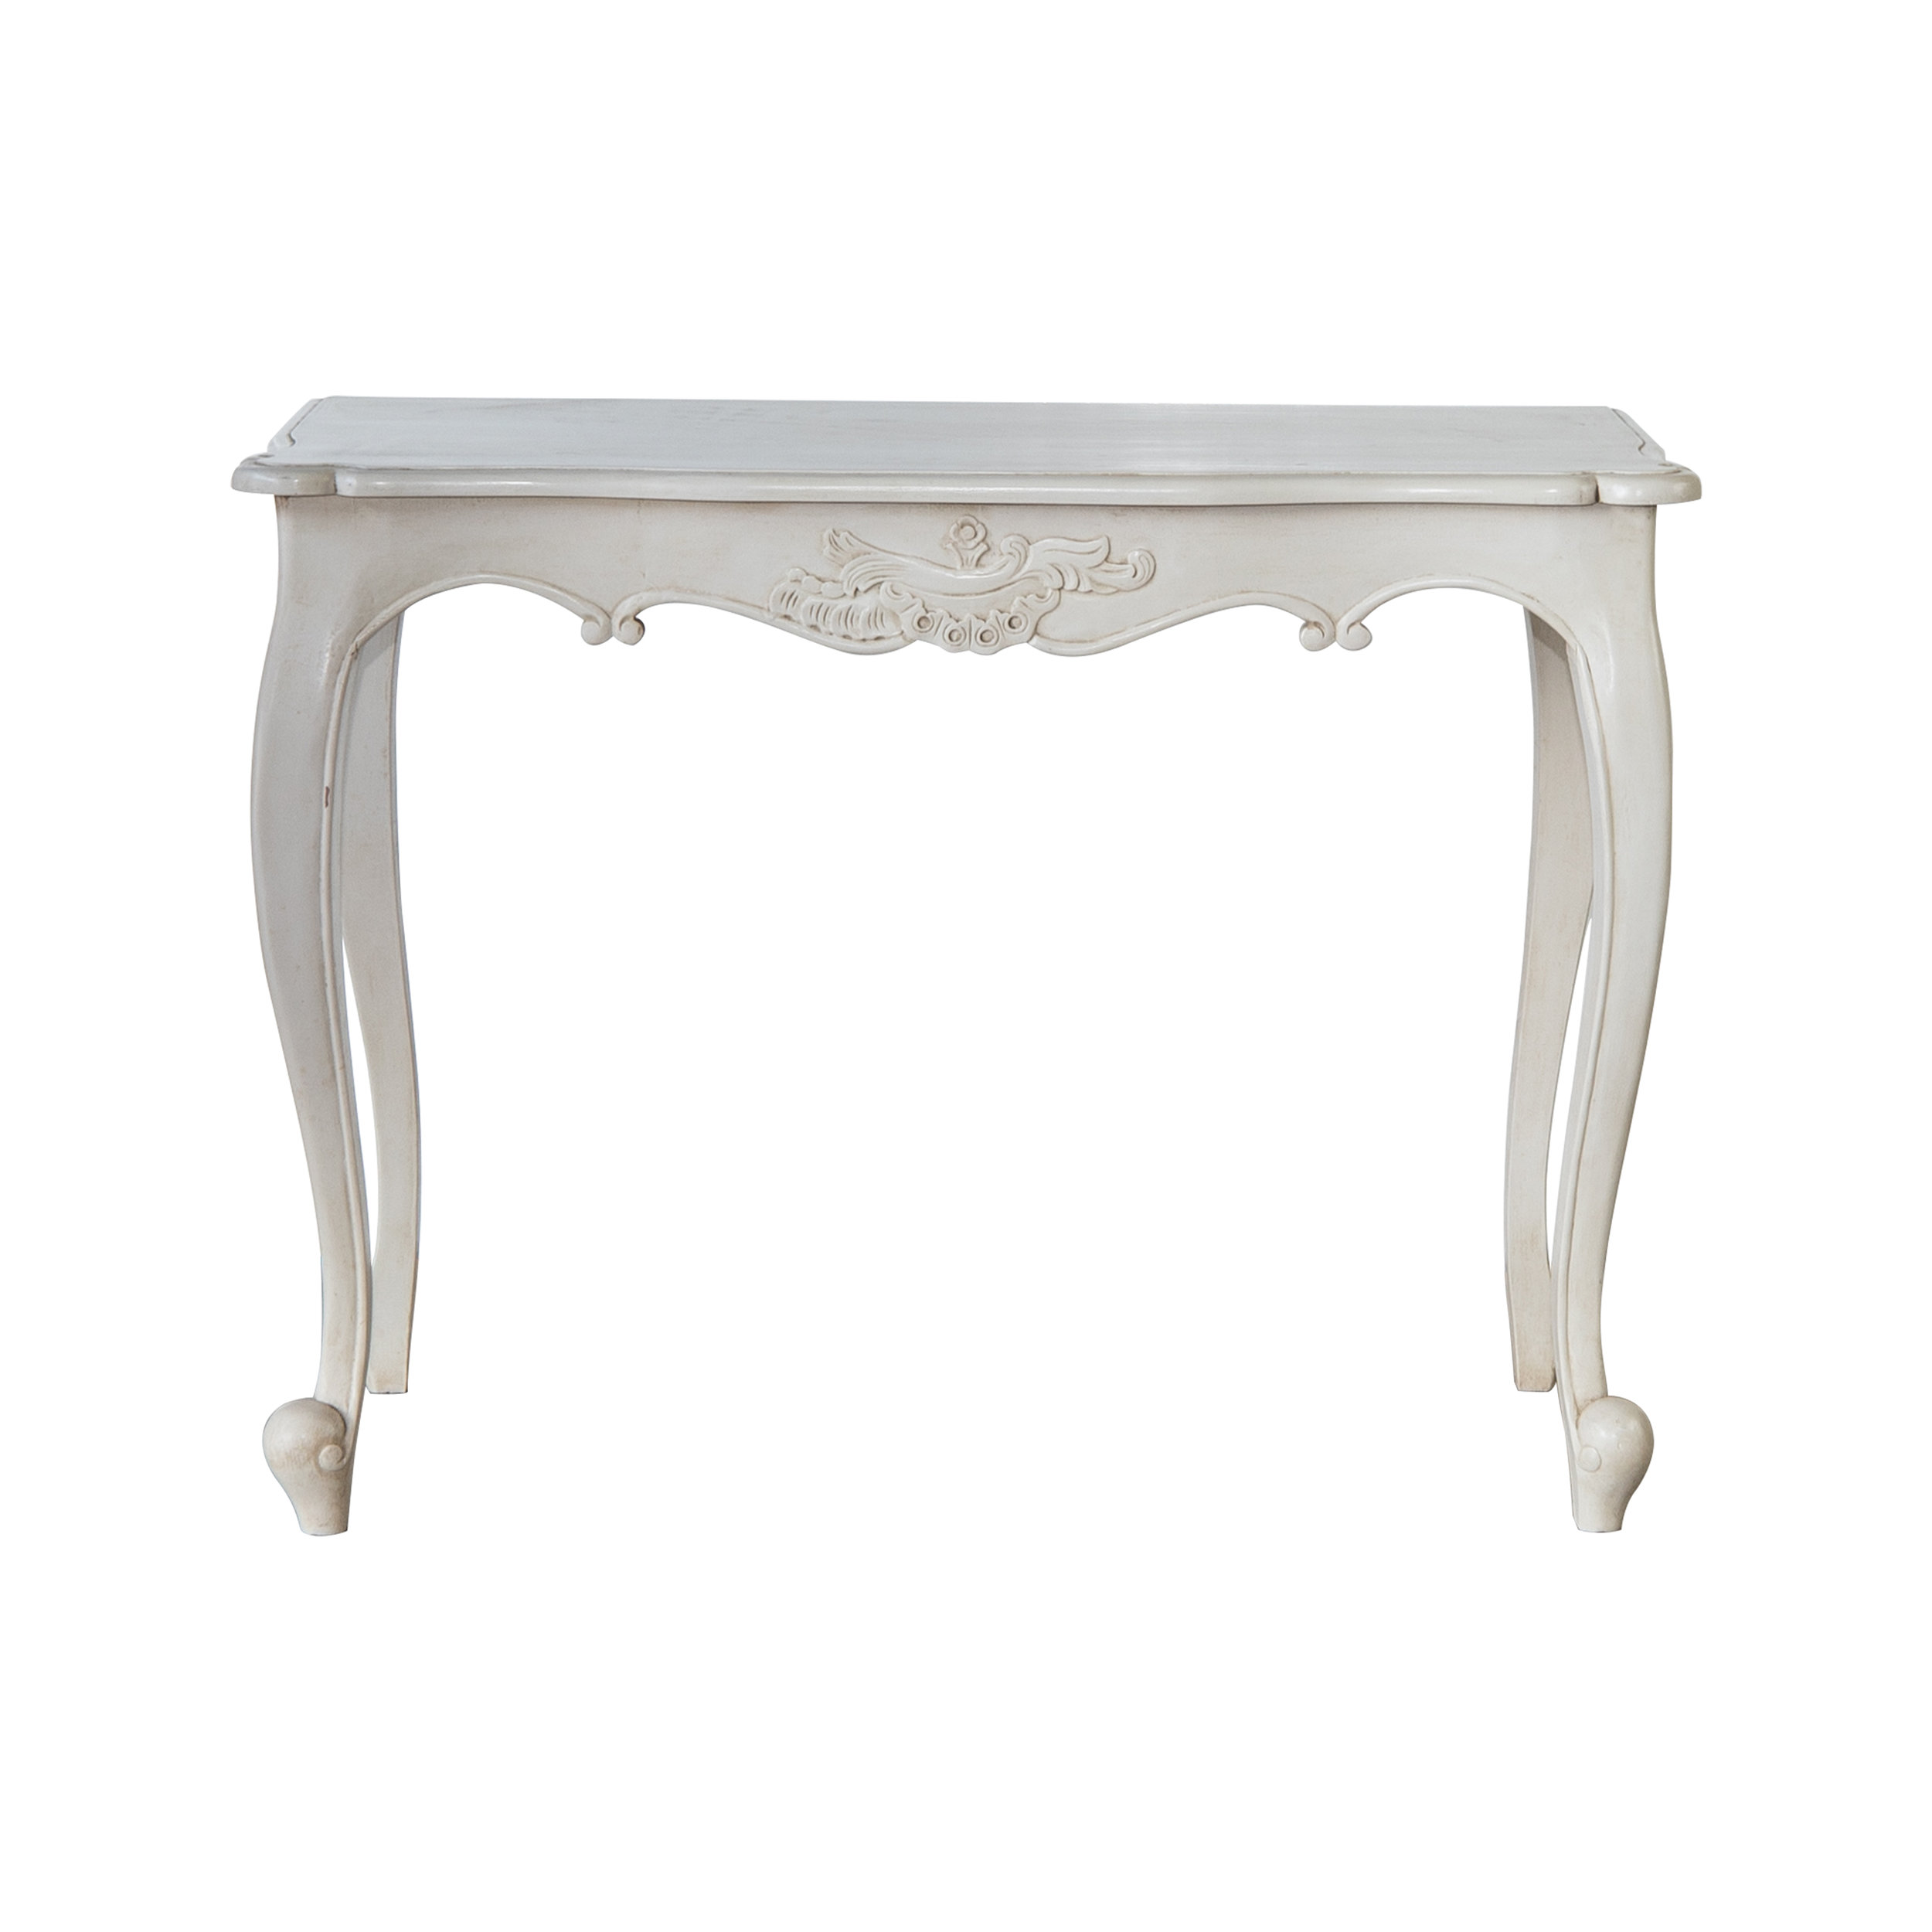 French Provincial Furniture Classic Hall Table In White The Find